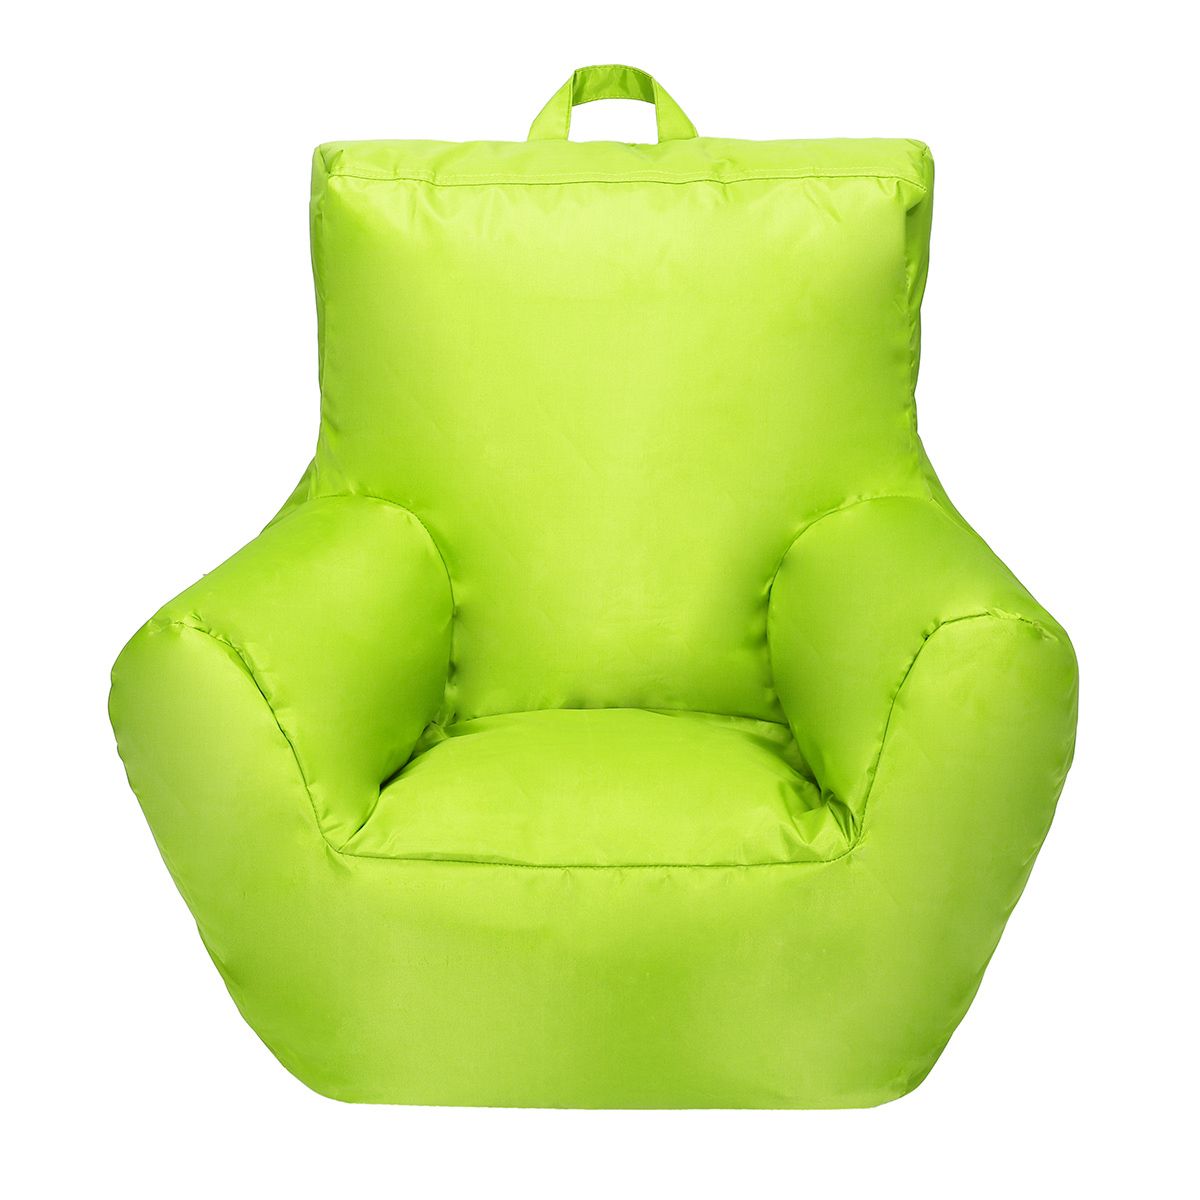 Comfortable-Bean-Bag-Cover-Chair-Gaming-Lounge-Living-Room-Bedroom-Playroom-Seat-1633789